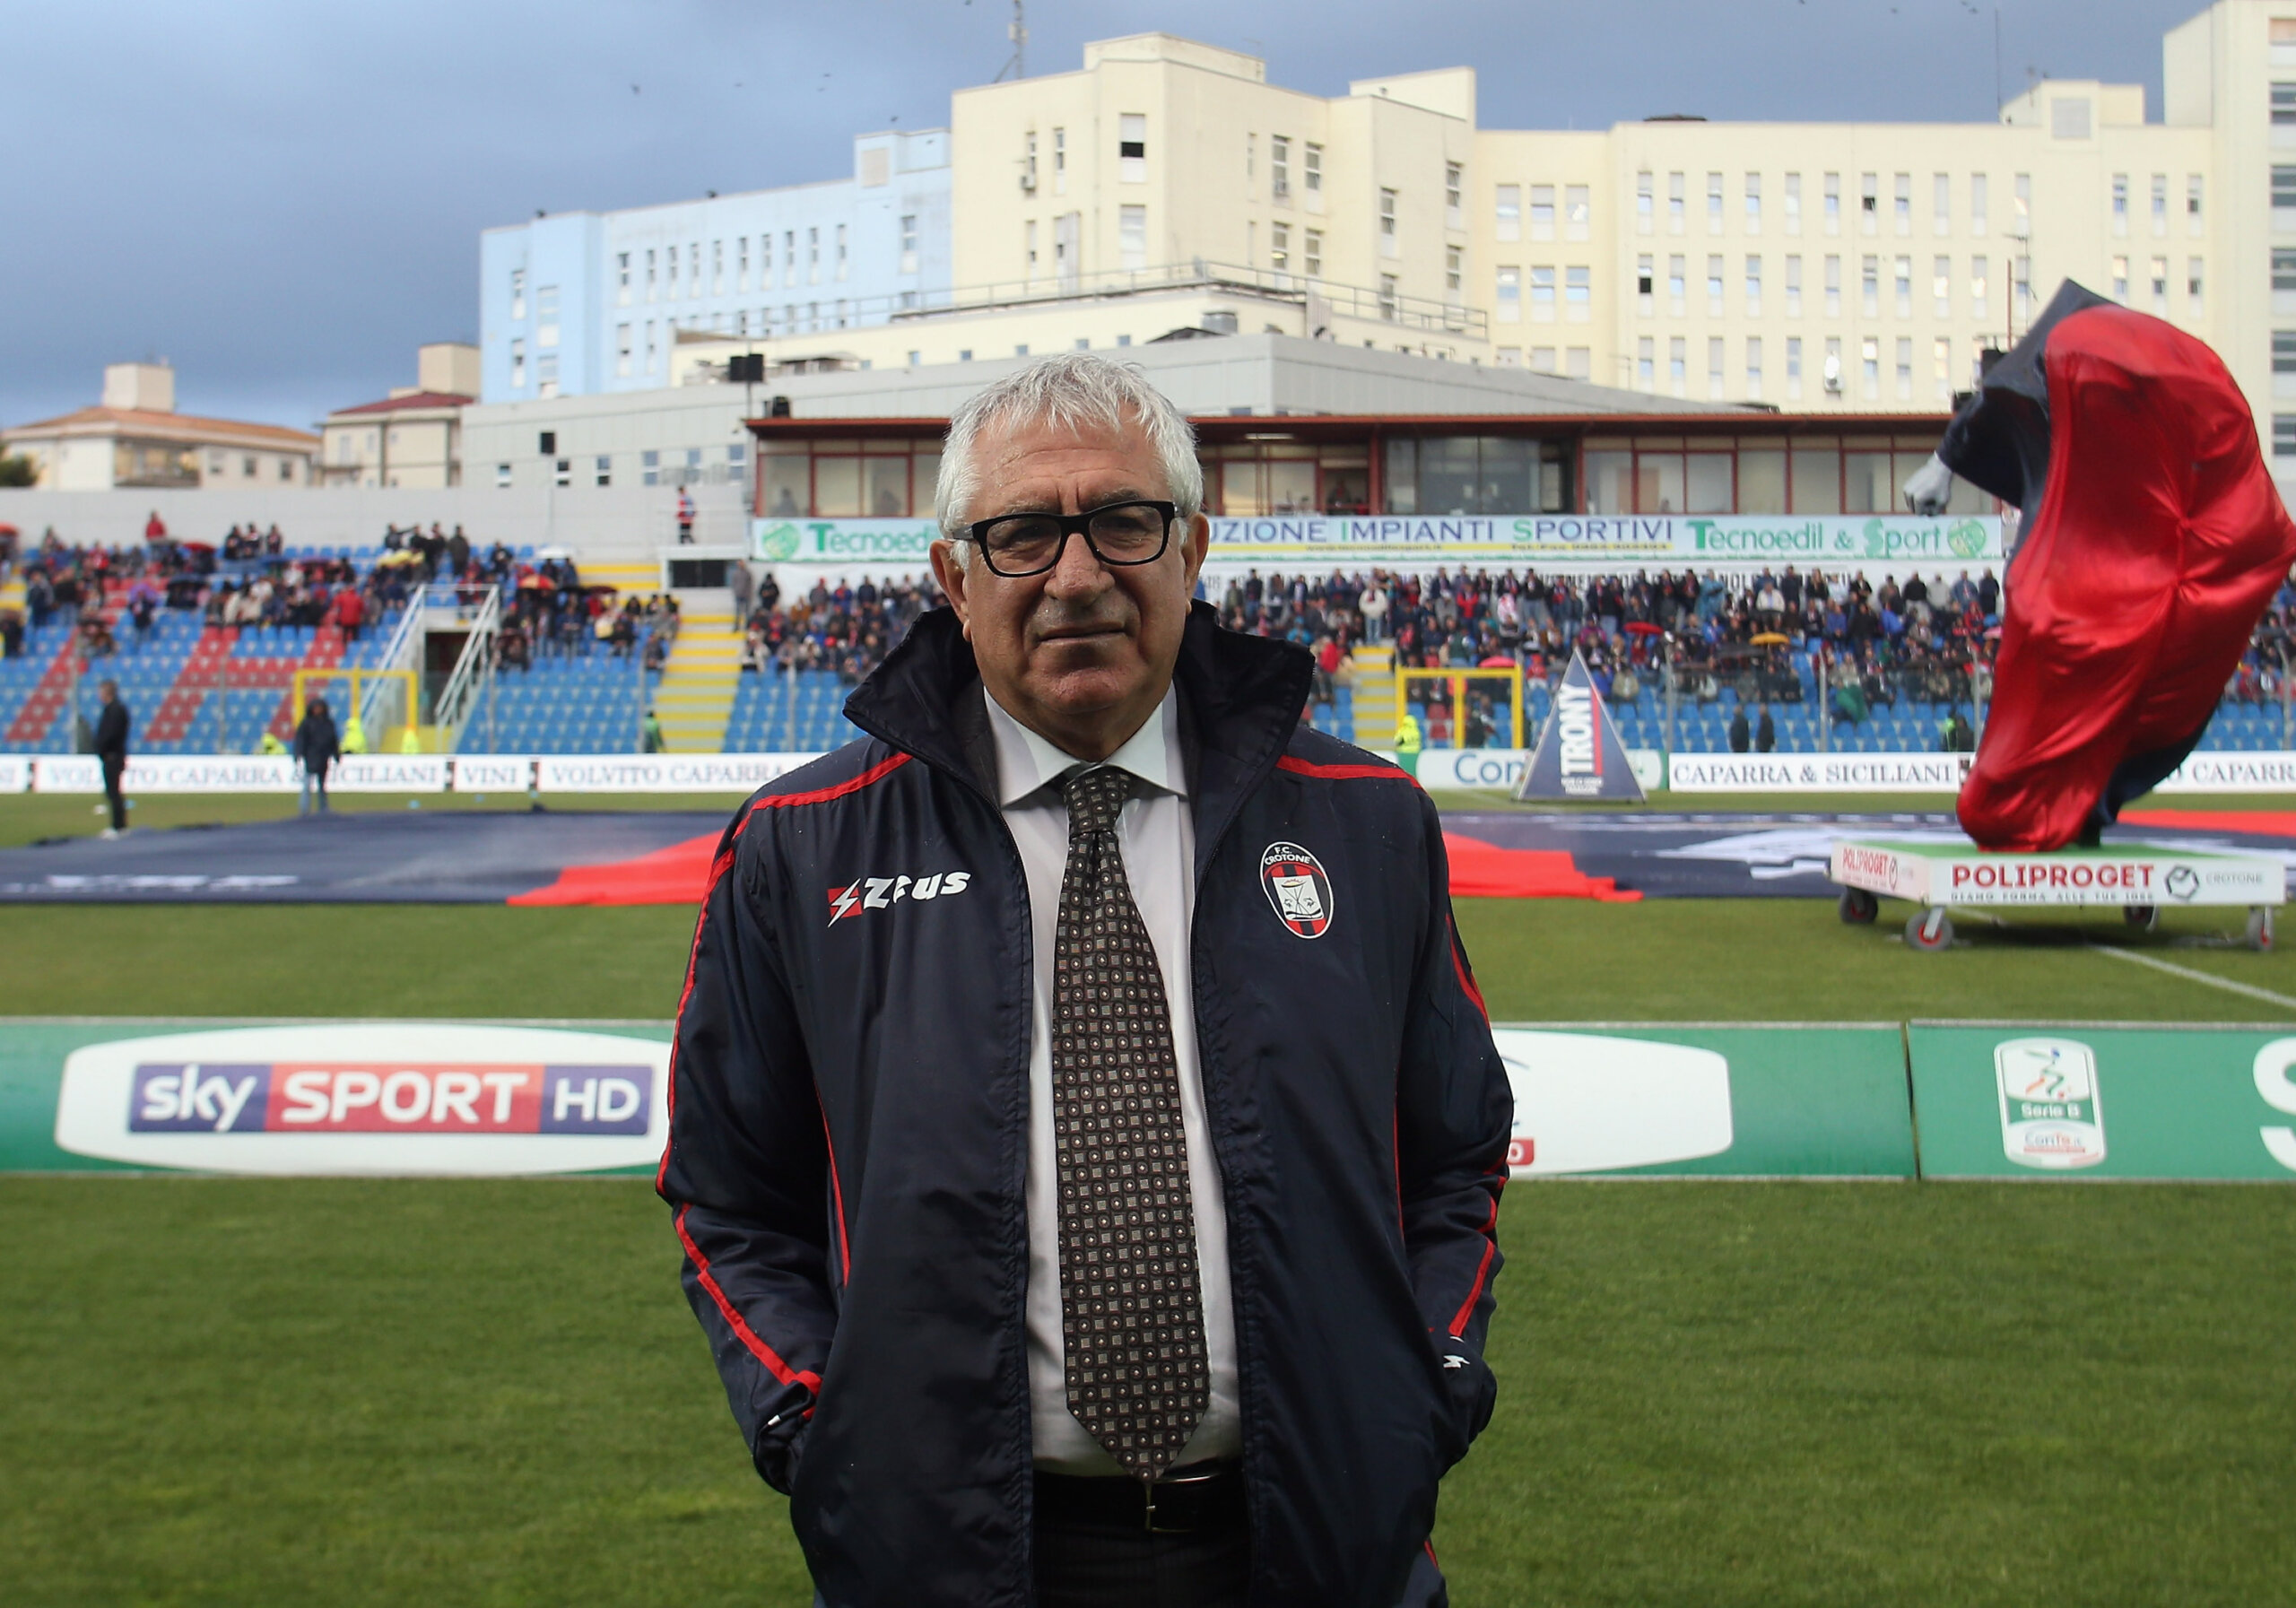 Ursino laid bare on Fiorentina’s requirements, sensing a strong reinforcement in defence would provide Vincenzo Italiano with the leap in quality.